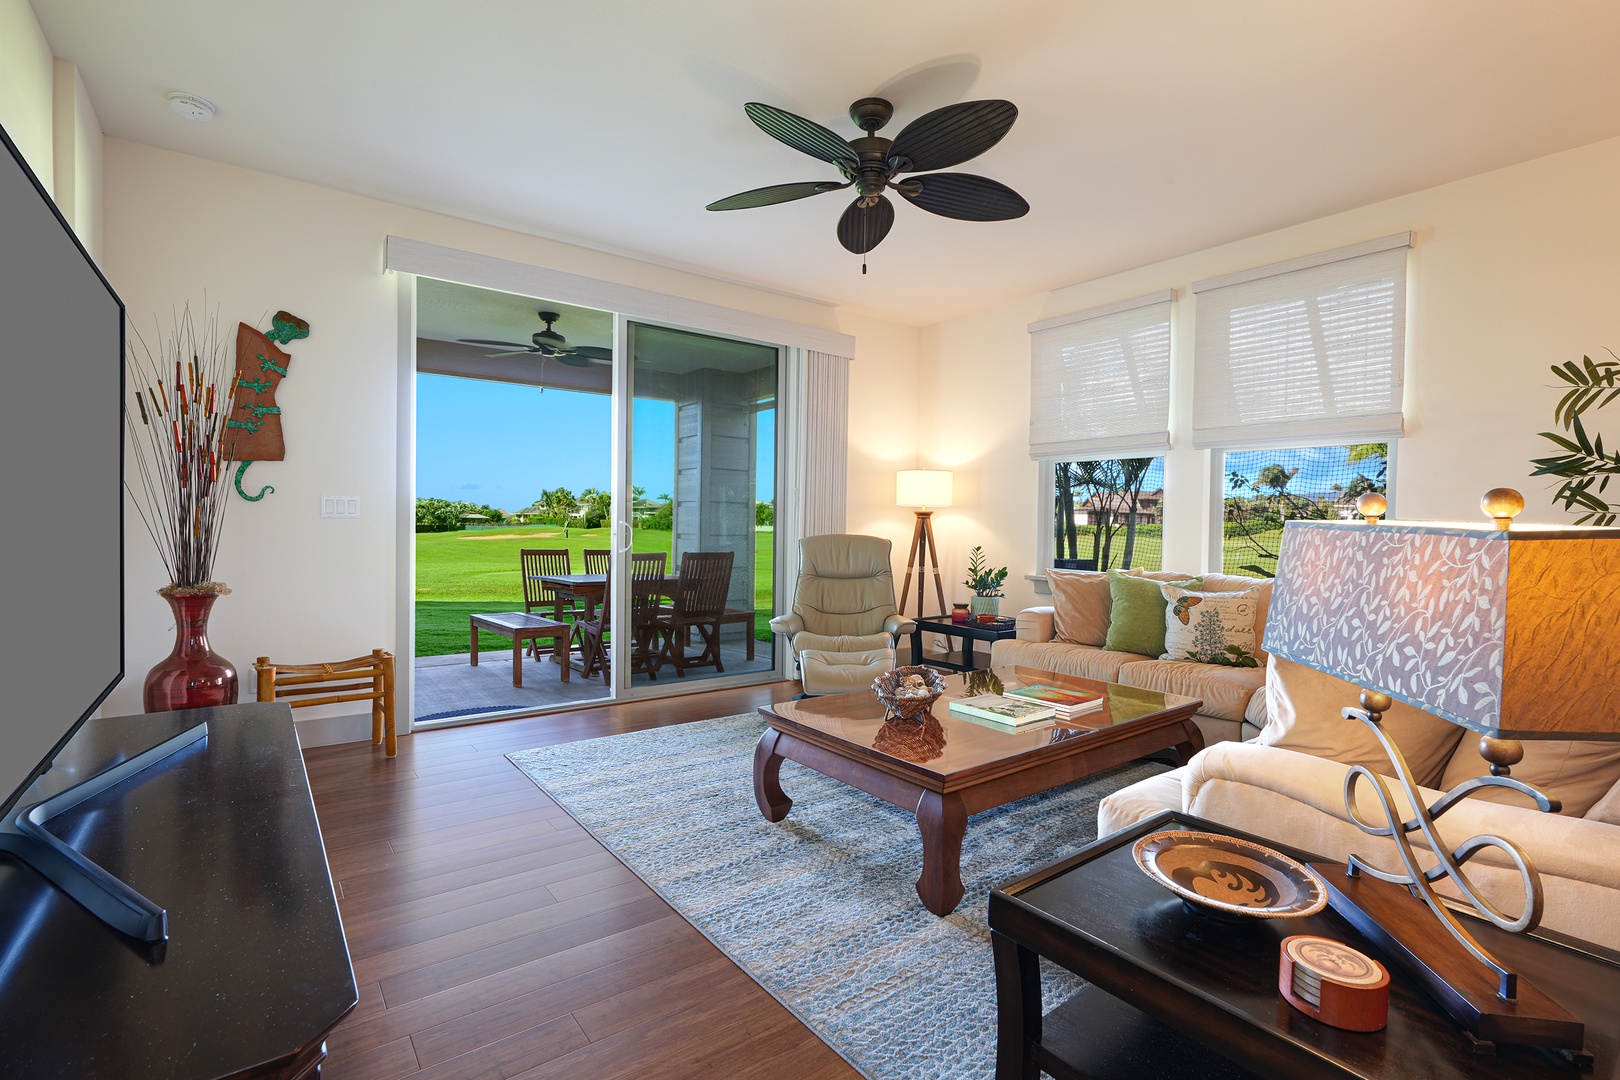 Koloa Vacation Rentals, Pili Mai 7J - Inviting living space with sliding doors that open to a scenic golf course view.